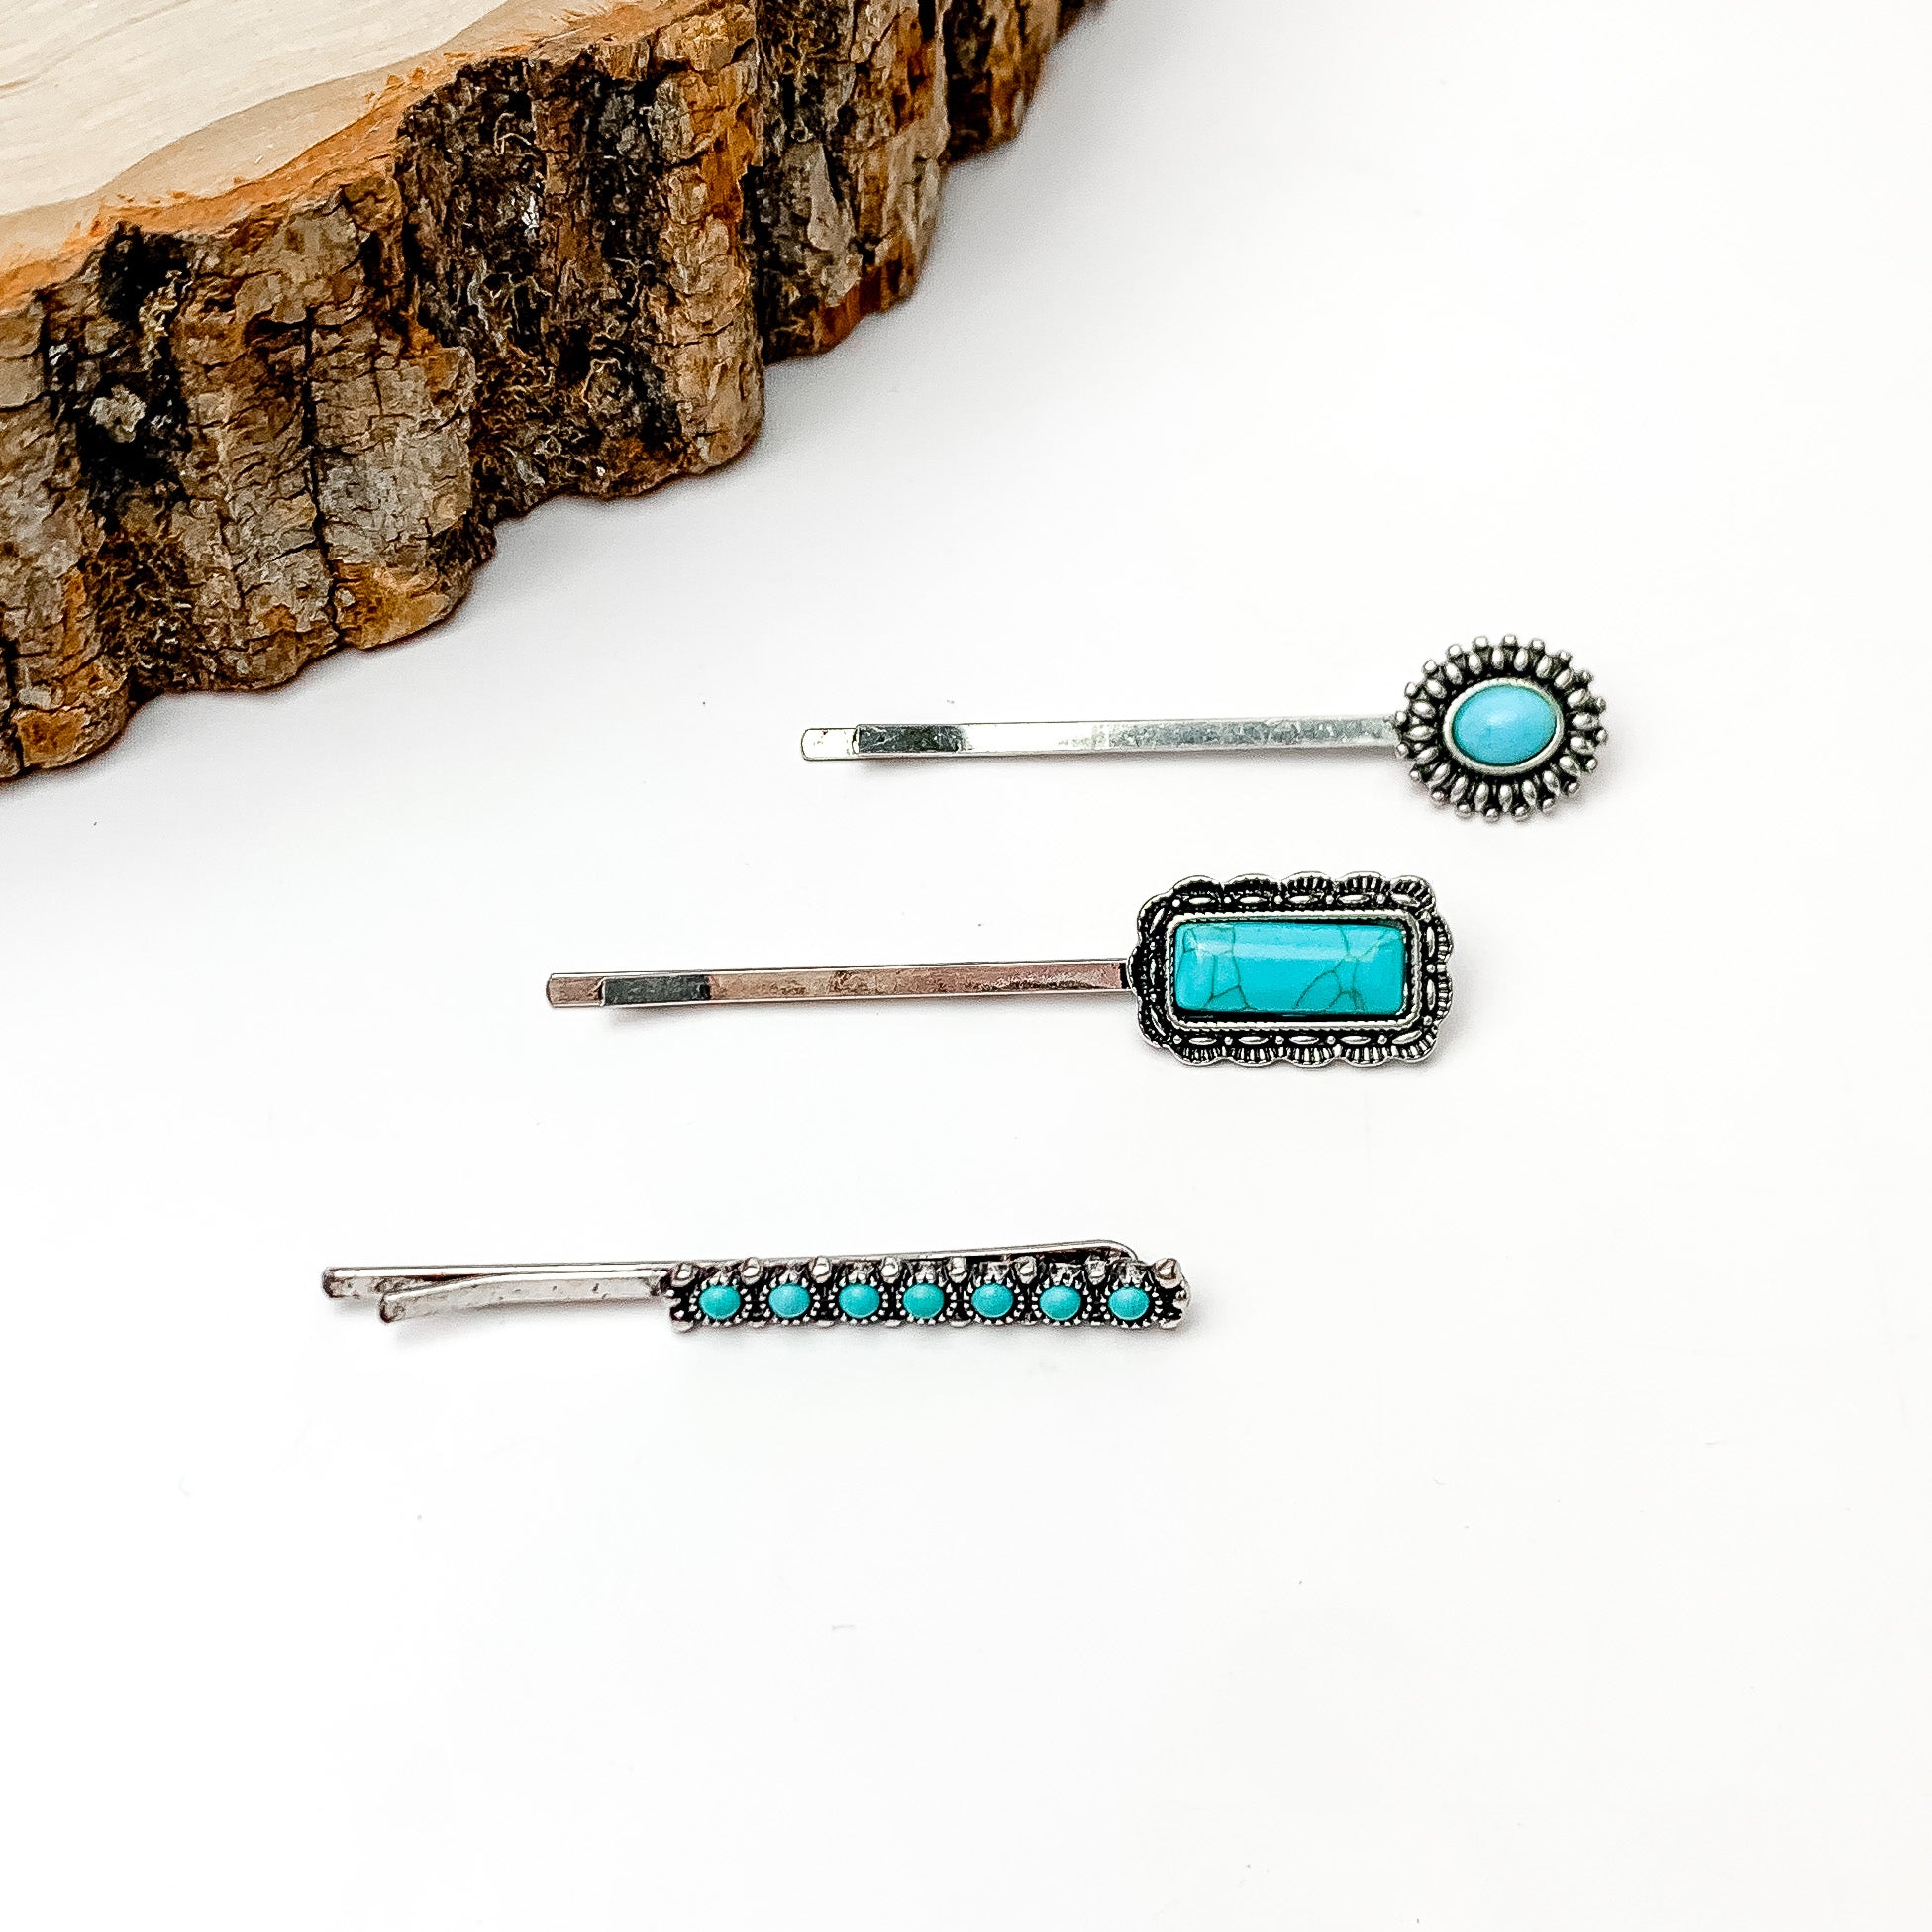 Set of Three | Western Designed Faux Turquoise Stone Hair Pins in Silver Tone. Pictured on a white background with a wood piece in the top left corner.